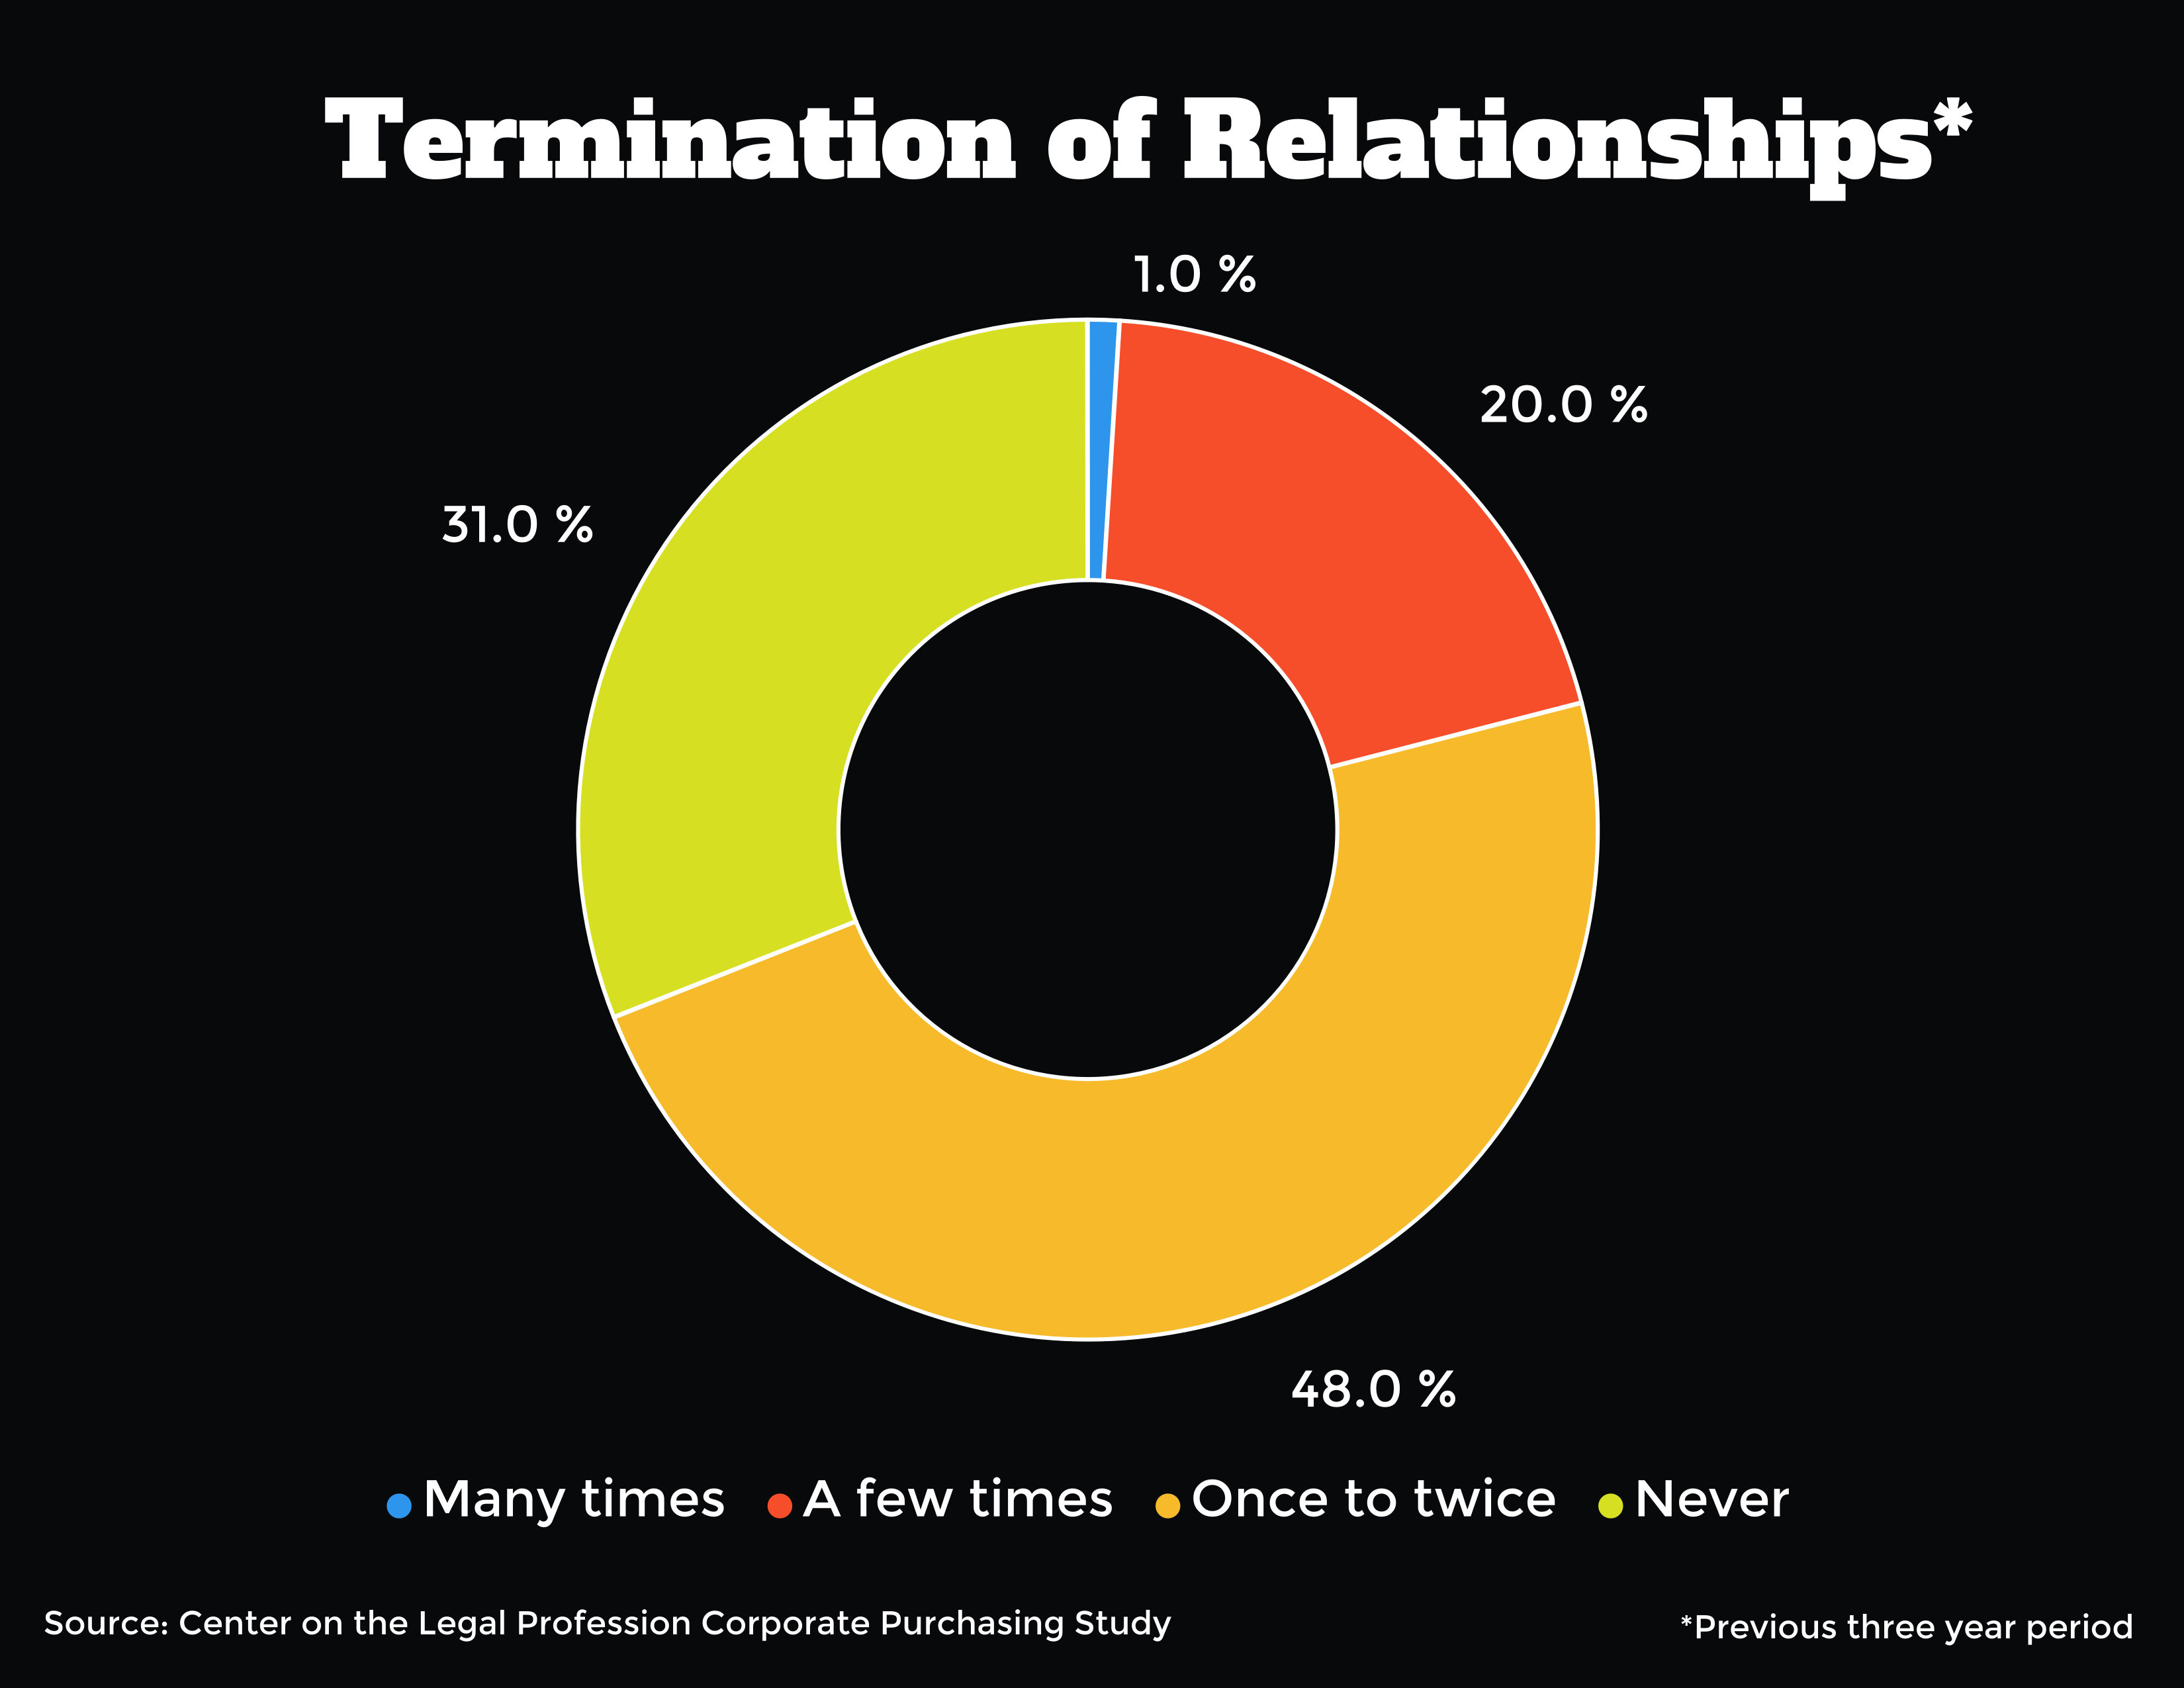 Chart shows how often GCs terminate relationships: 1.0% many times; 20% a few times; 48% once or twice; and 31% never.